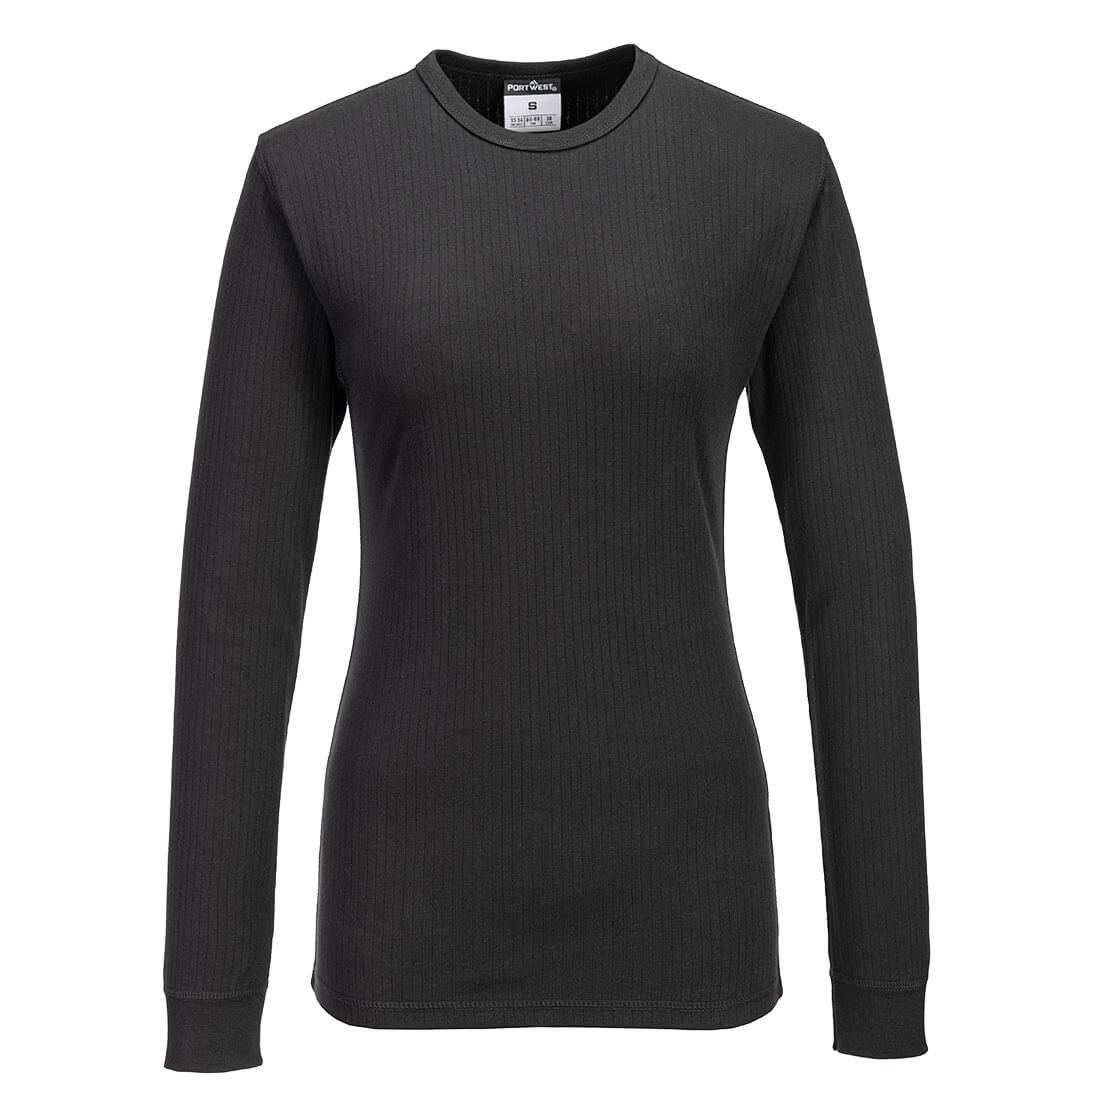 Portwest B126 Women's Thermal T-Shirt Long Sleeve for Baselayer